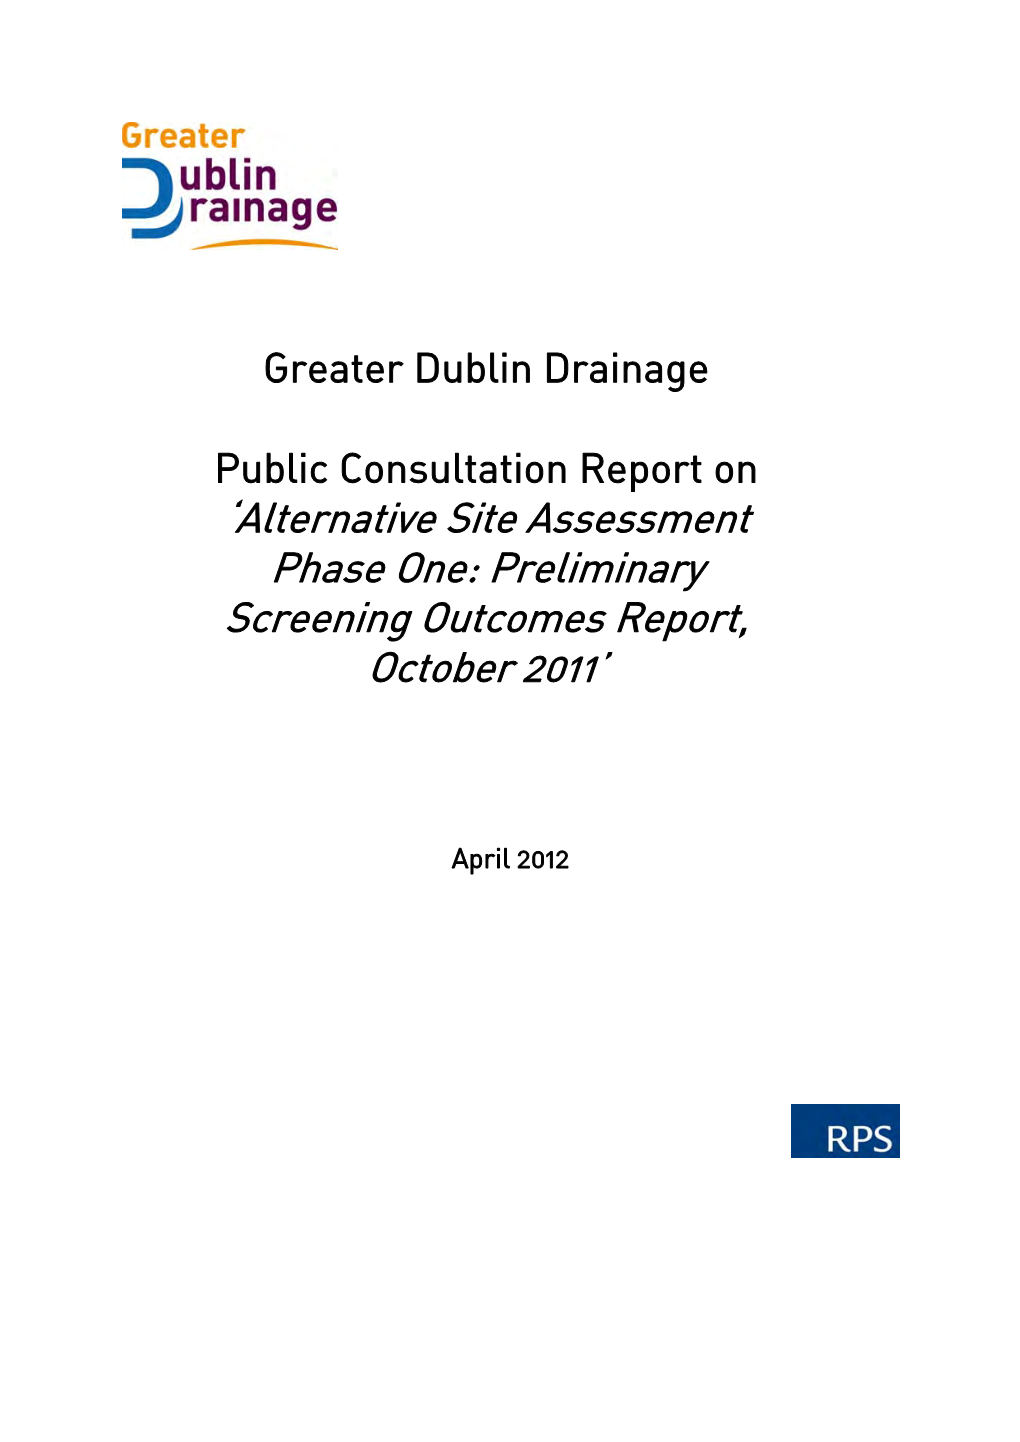 Public Consultation Report on ‘Alternative Site Assessment Phase One: Preliminary Screening Outcomes Report, October 2011’